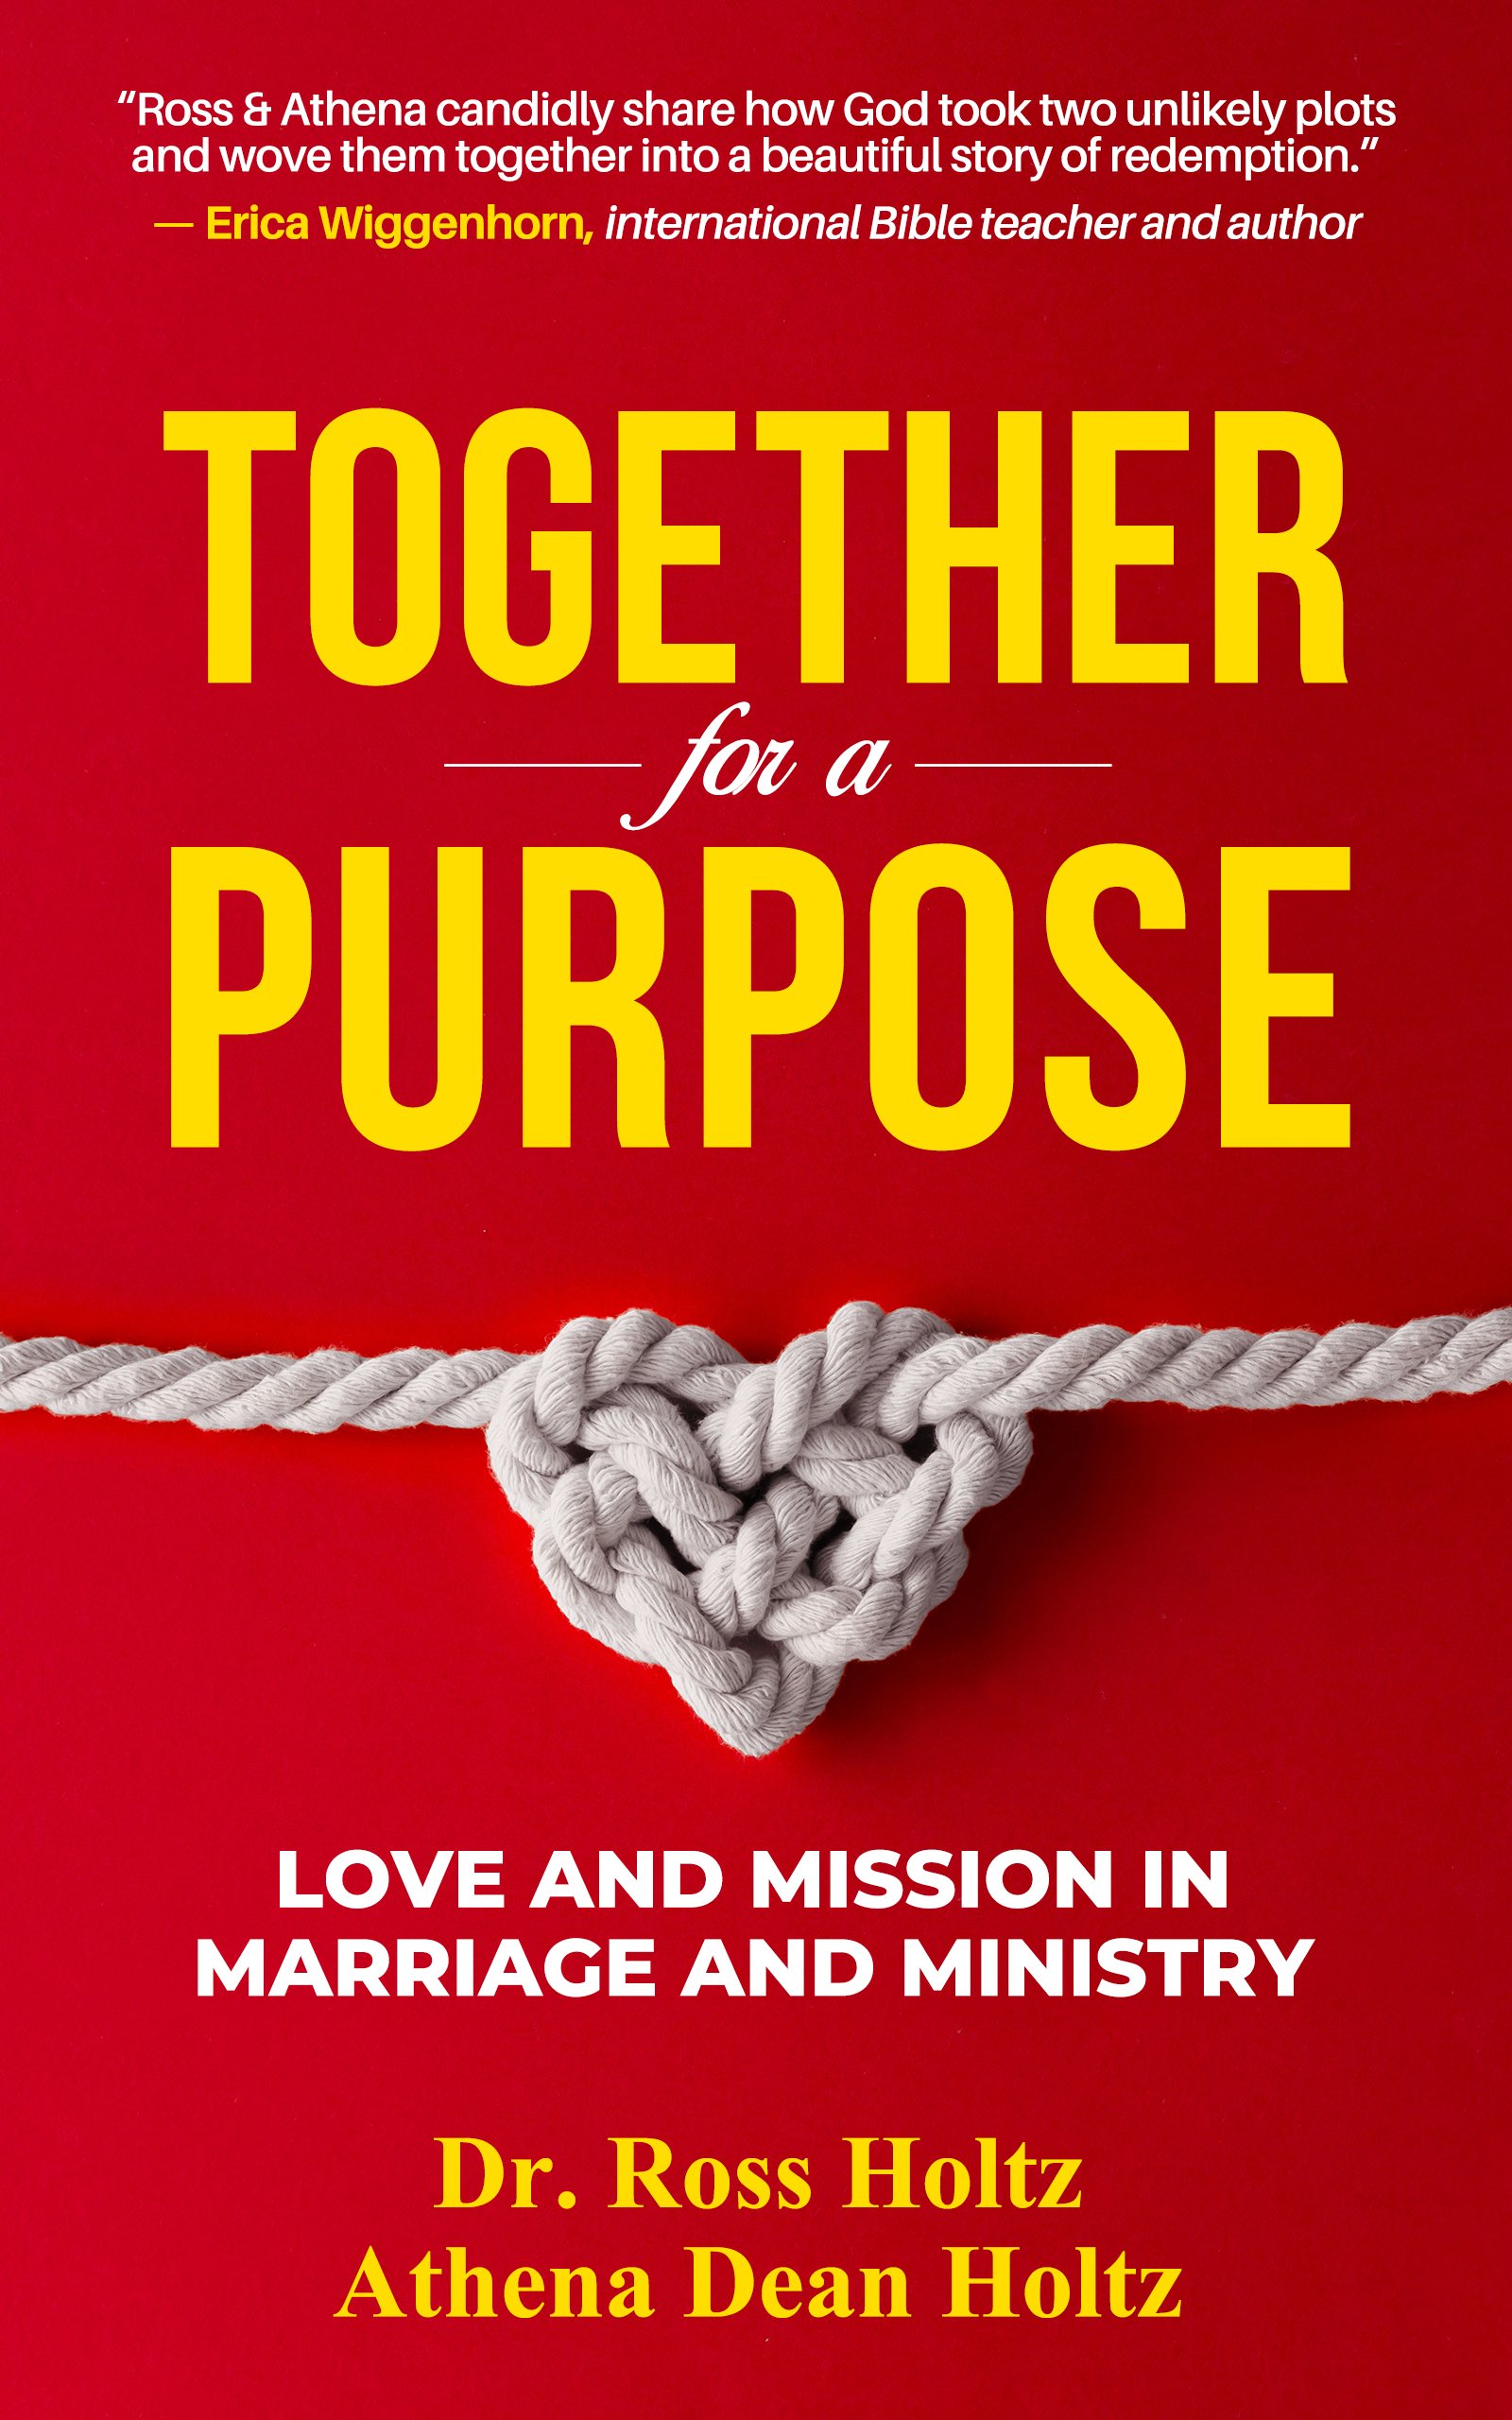 Together for a Purpose_eBook (1)